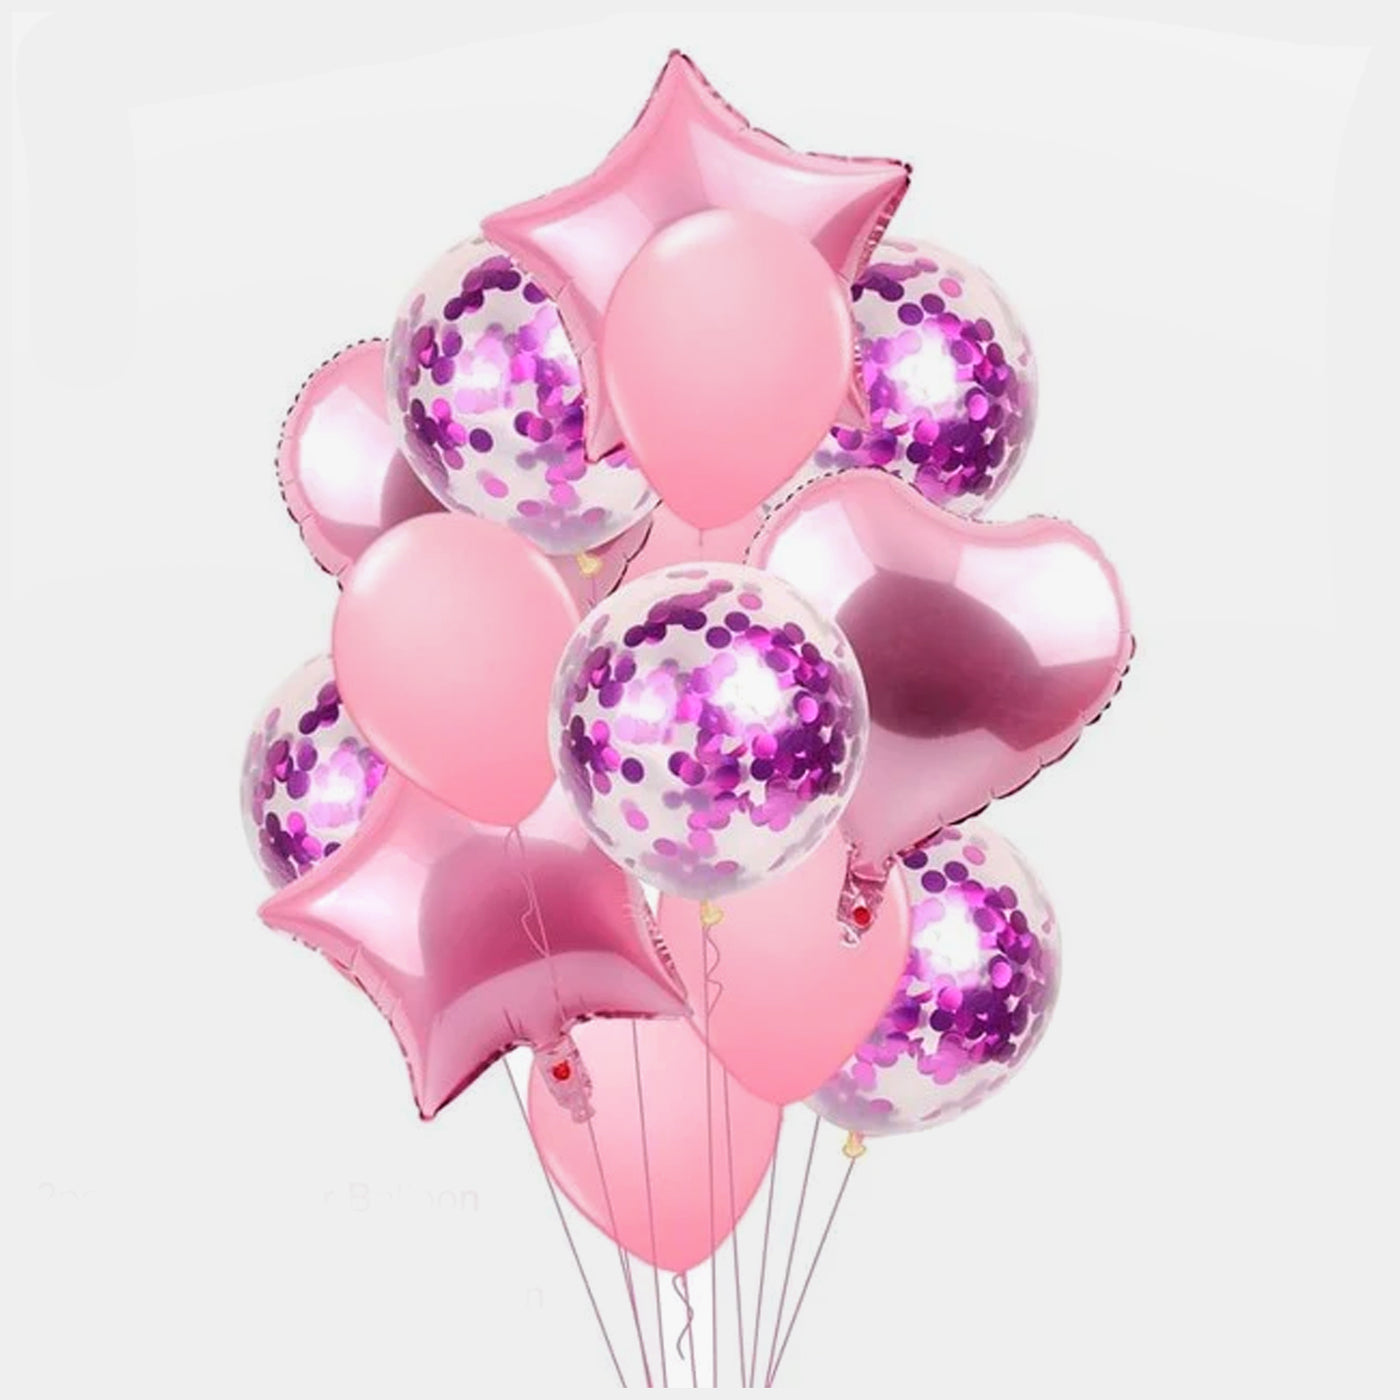 FOIL MIX BALLOON BIRTHDAY PARTY DECORATION 14PCS/PACK